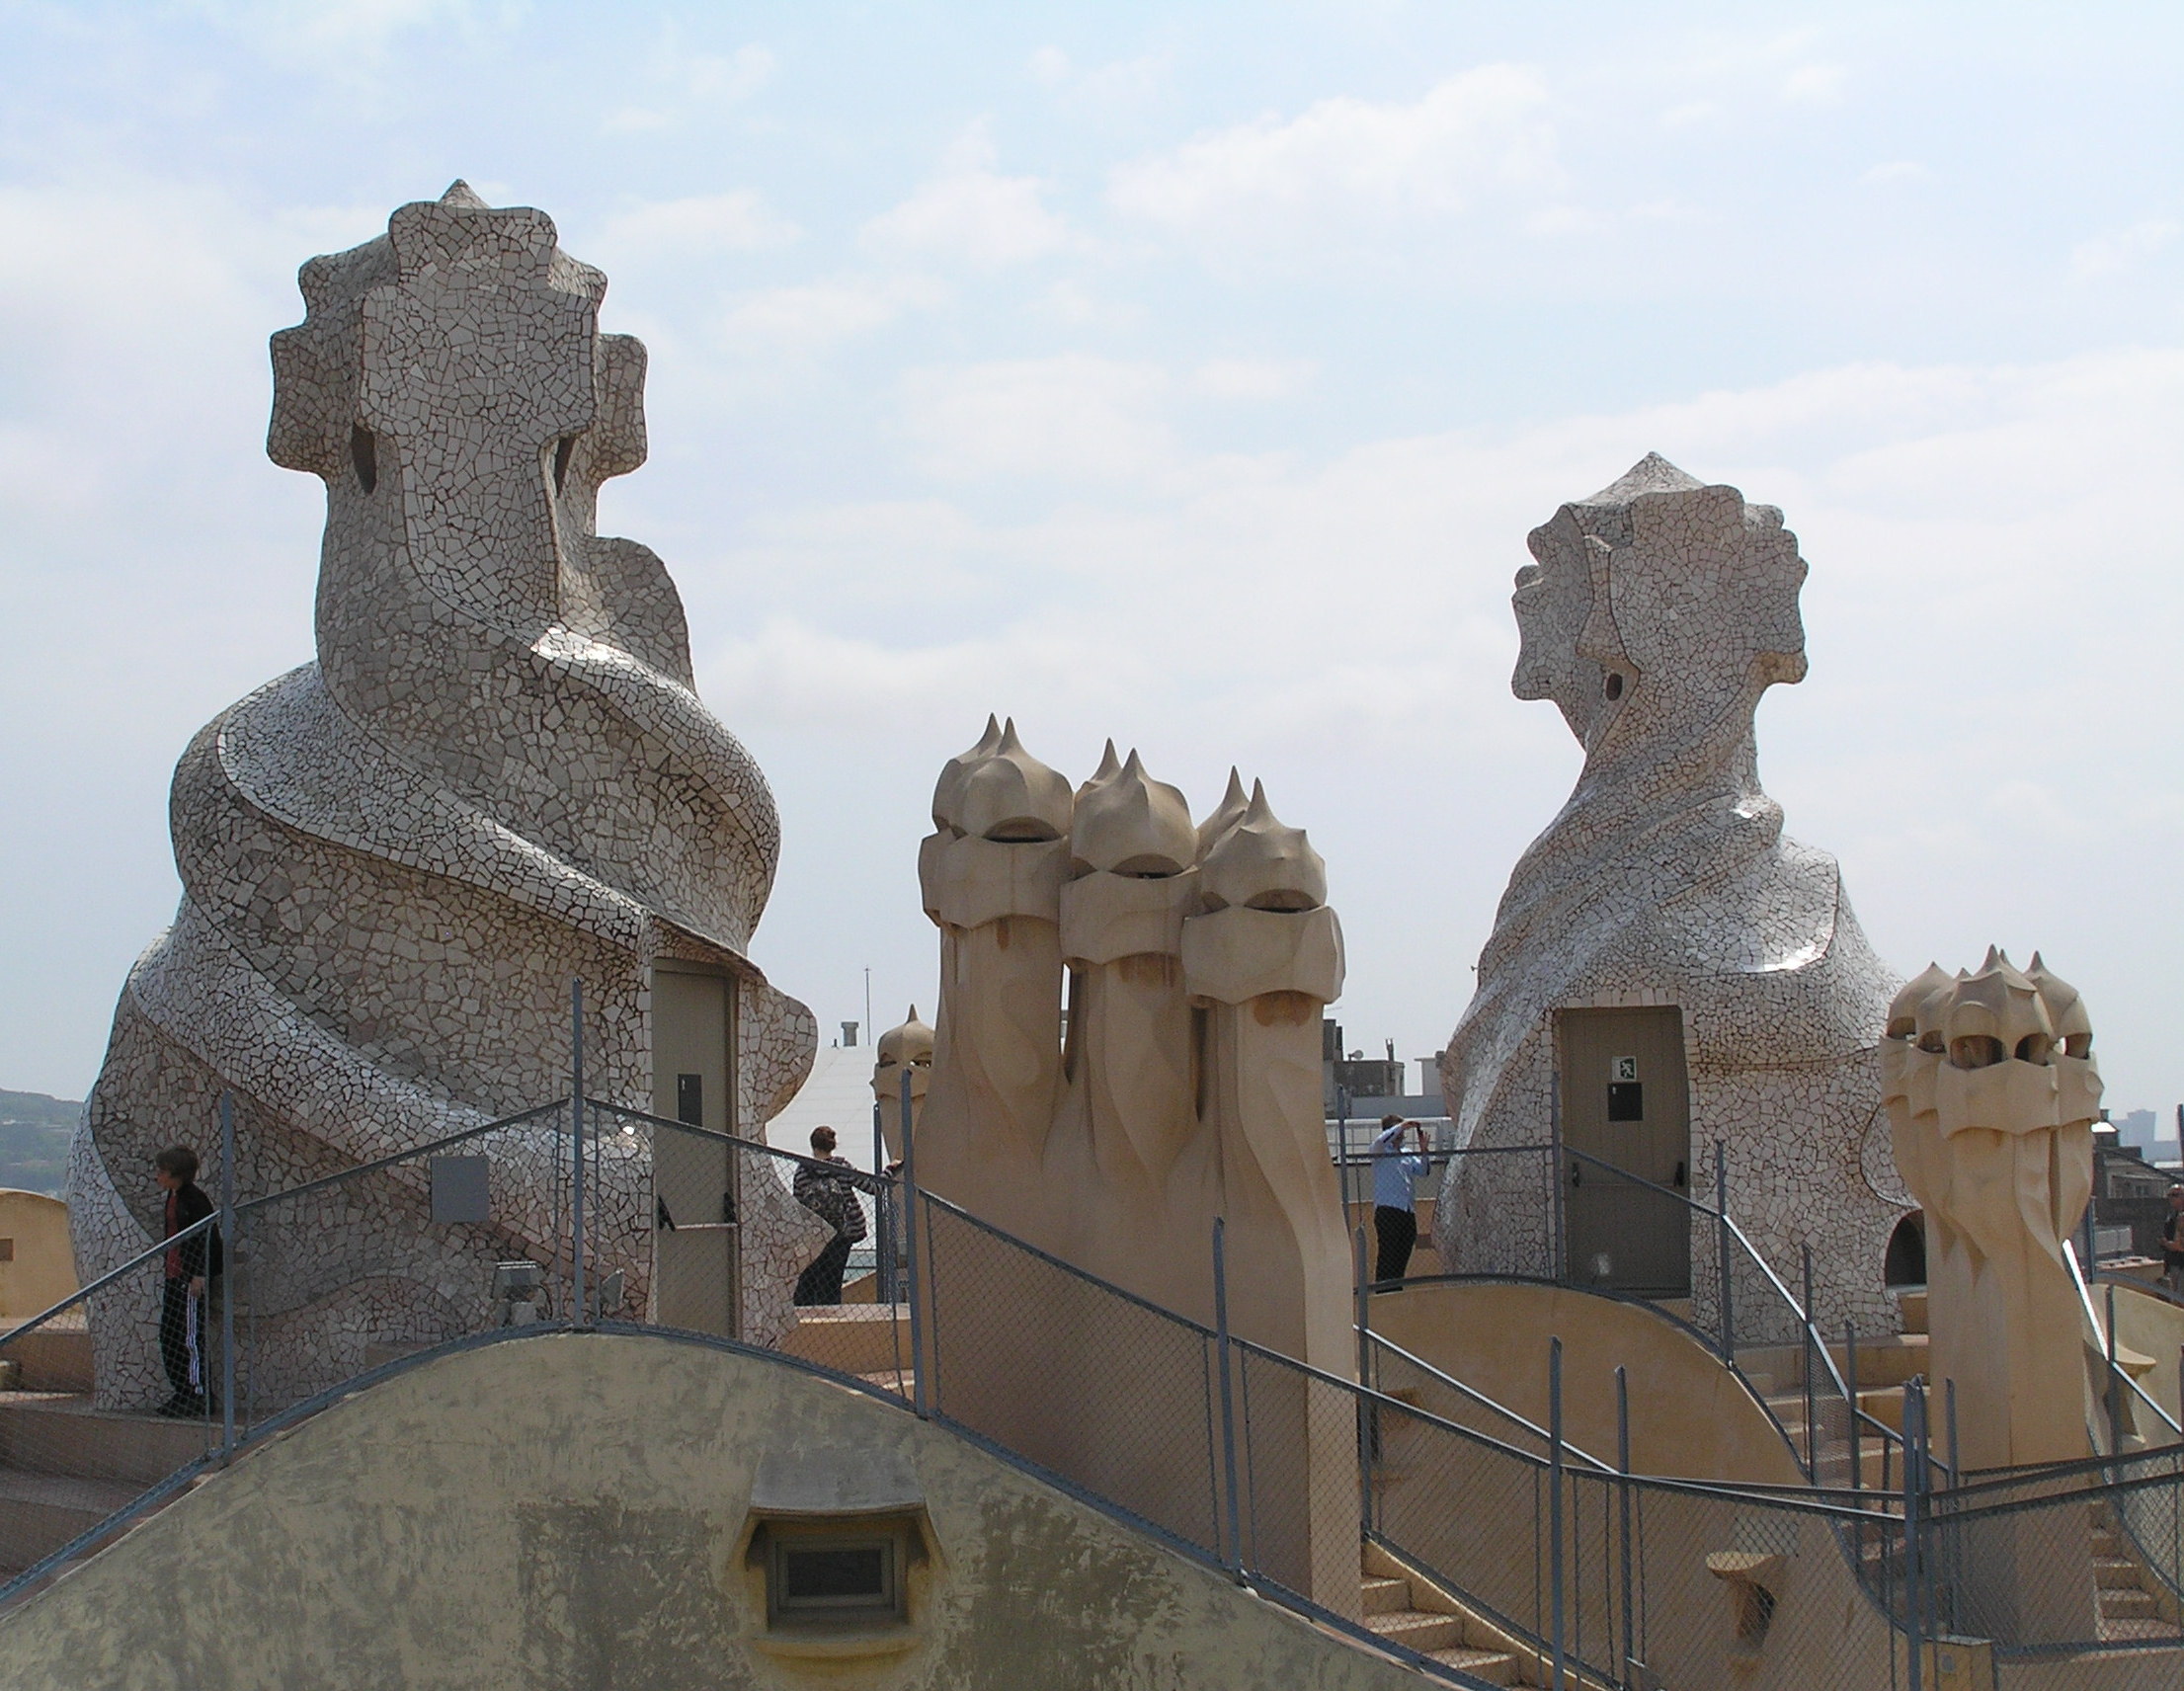 Another Gaudi Marvel